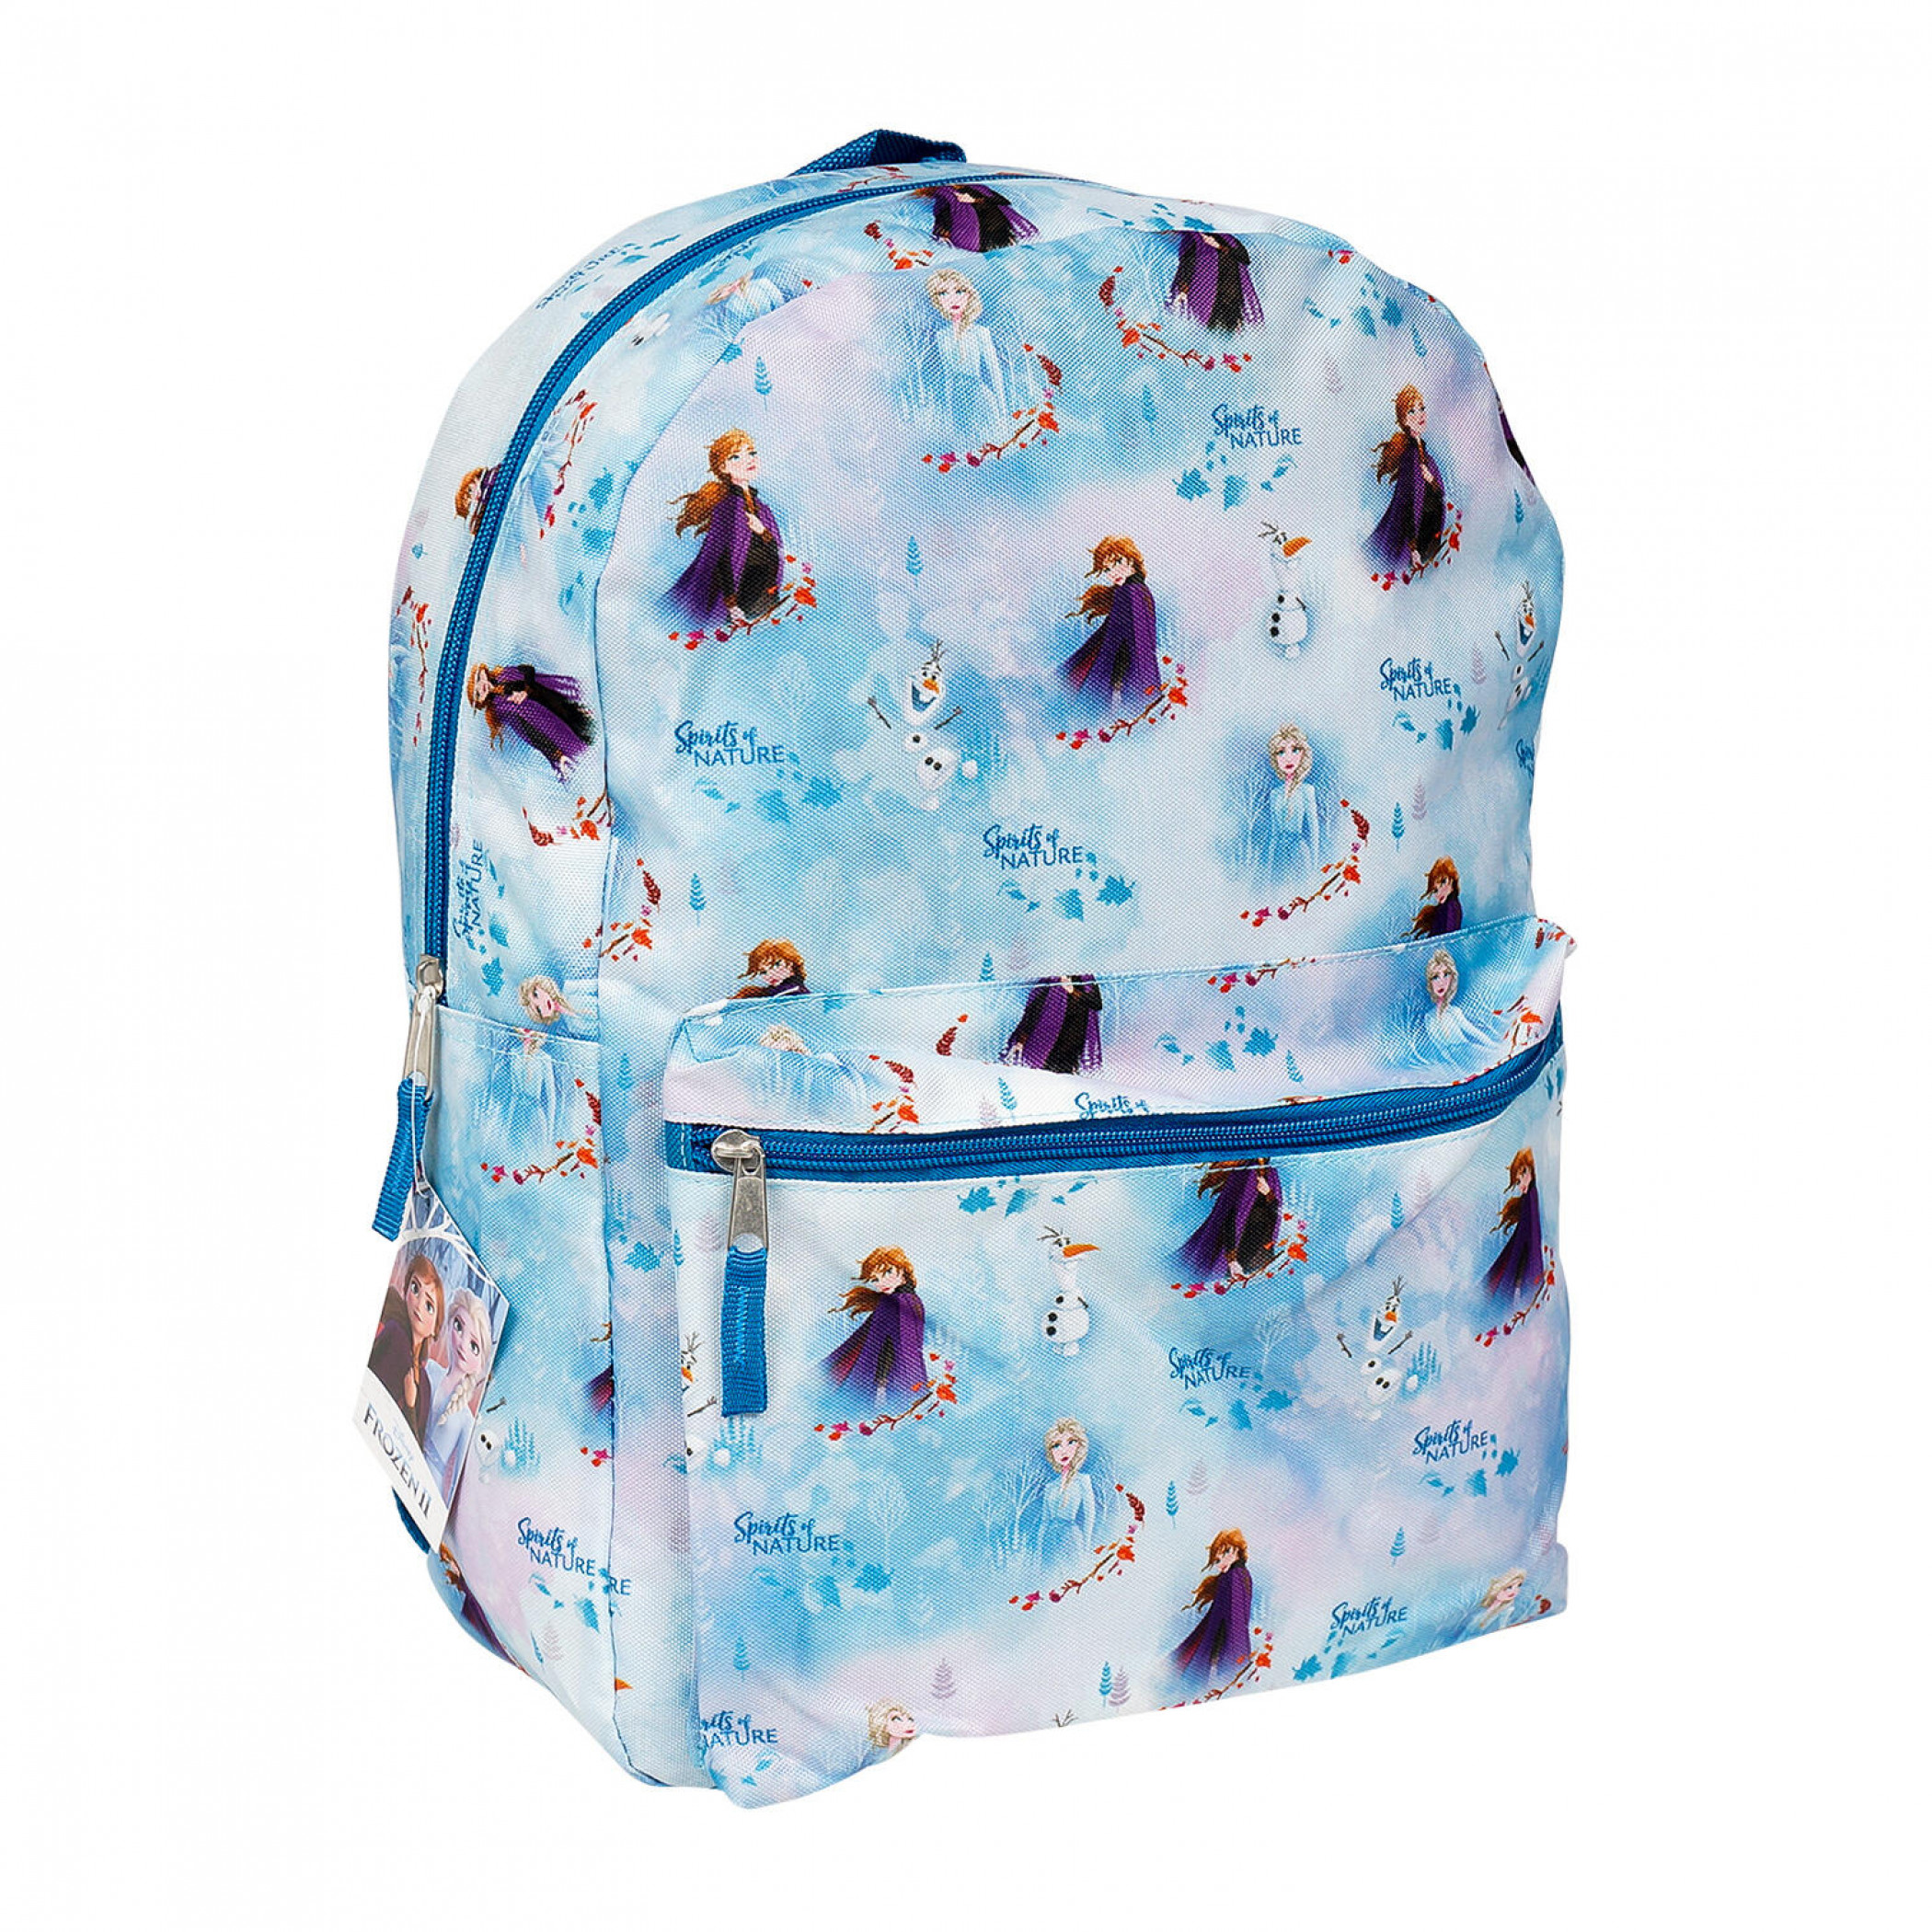 Frozen 2 Elsa, Anna, and Olaf All Over Print Backpack